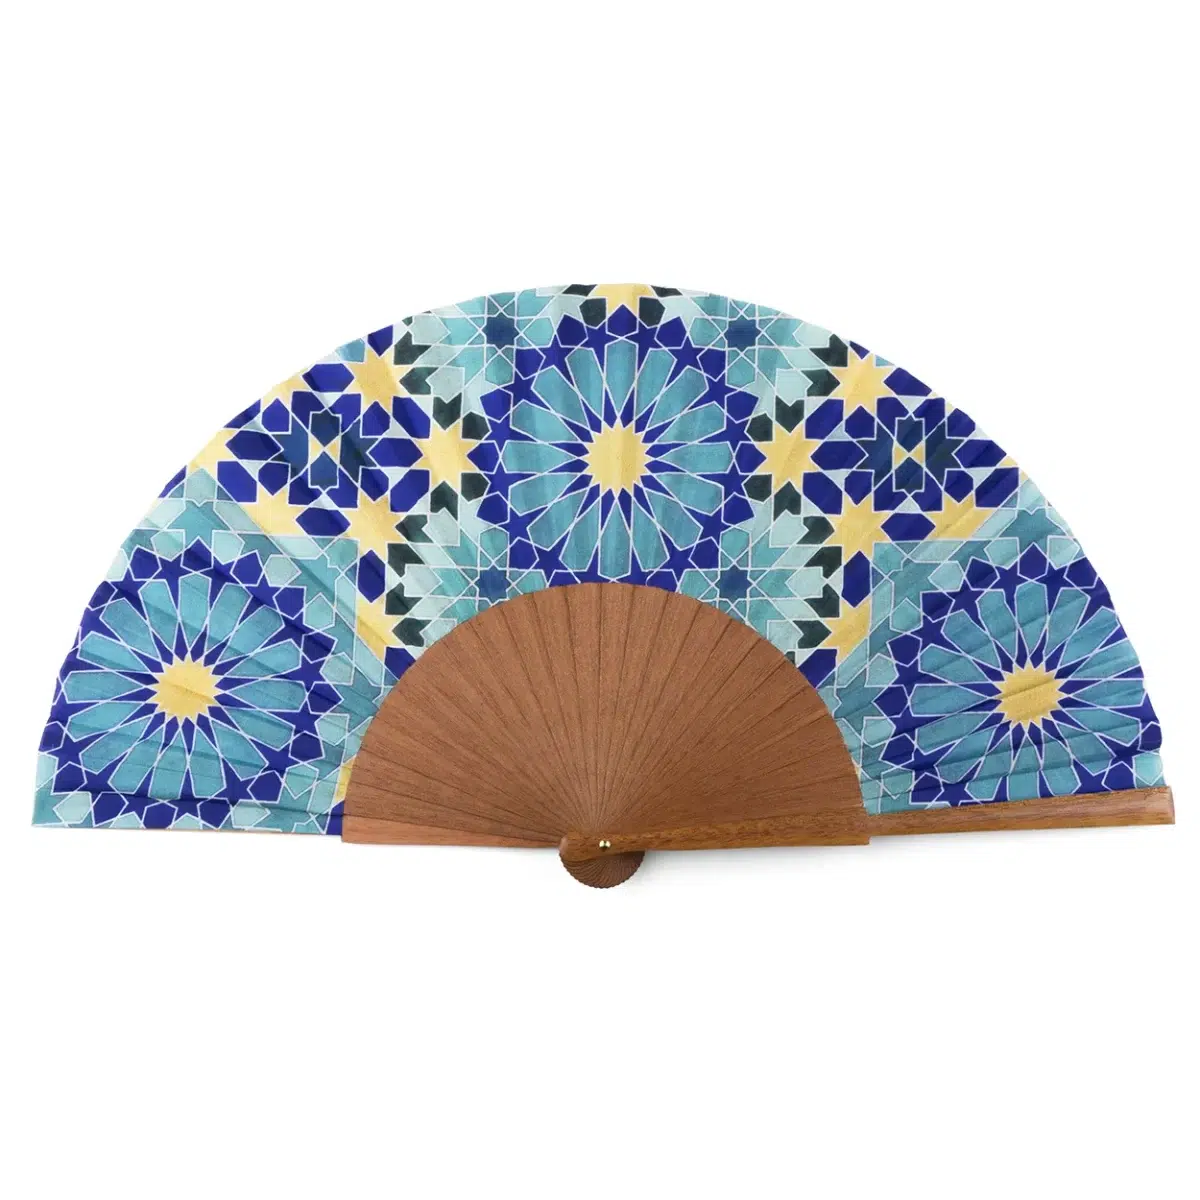 Silk Fan with Blue and Gold Tones and Design Inspired by Islamic Geometry.